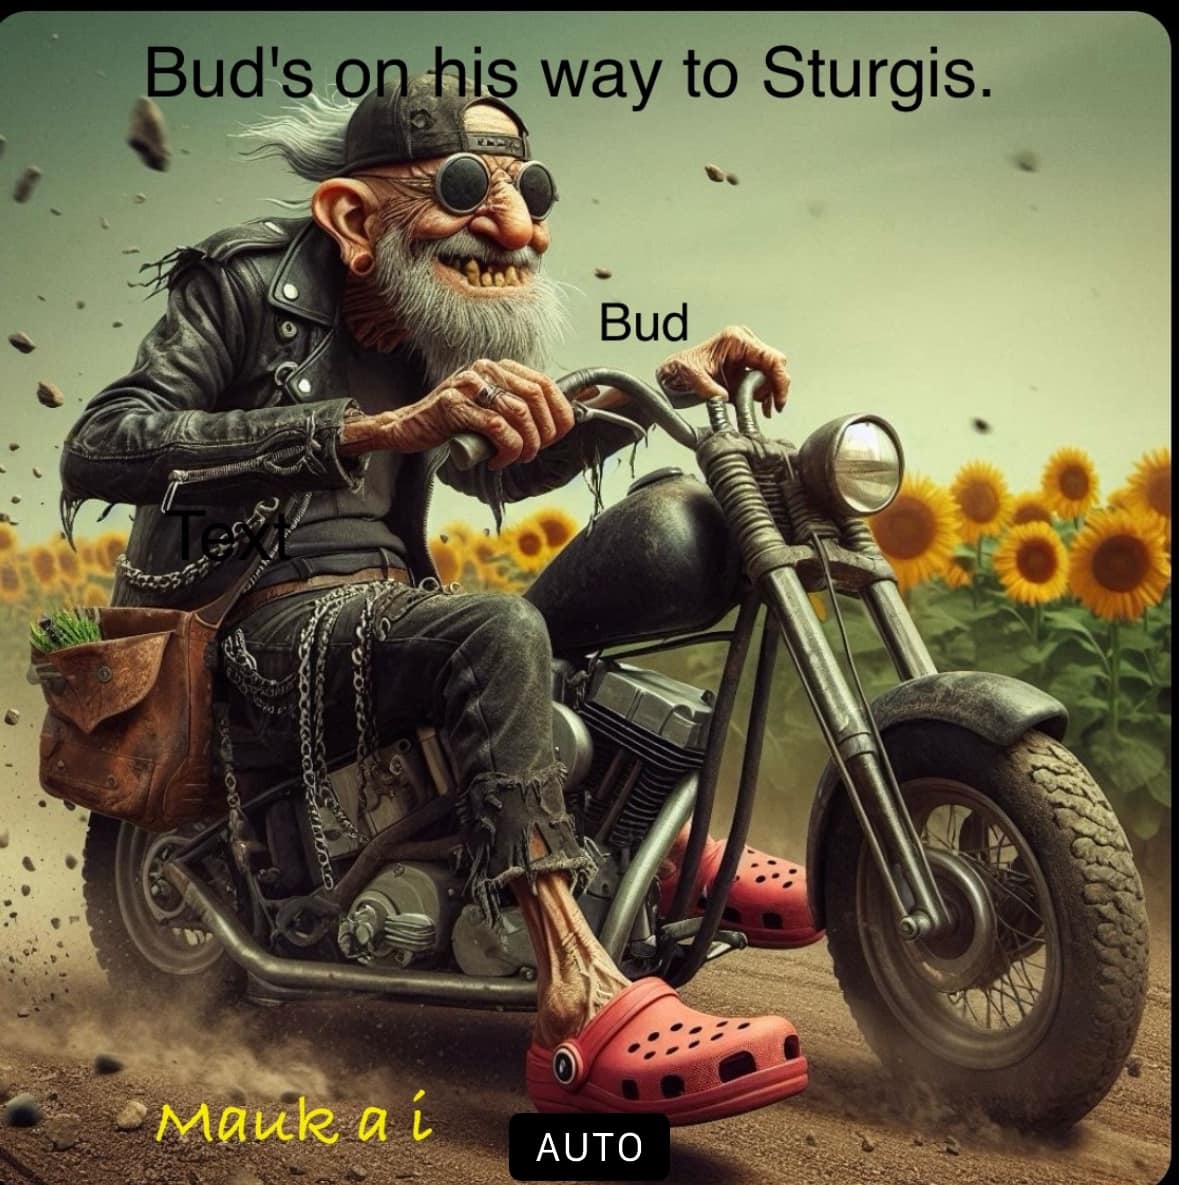 May be an image of 1 person, motorcycle and text